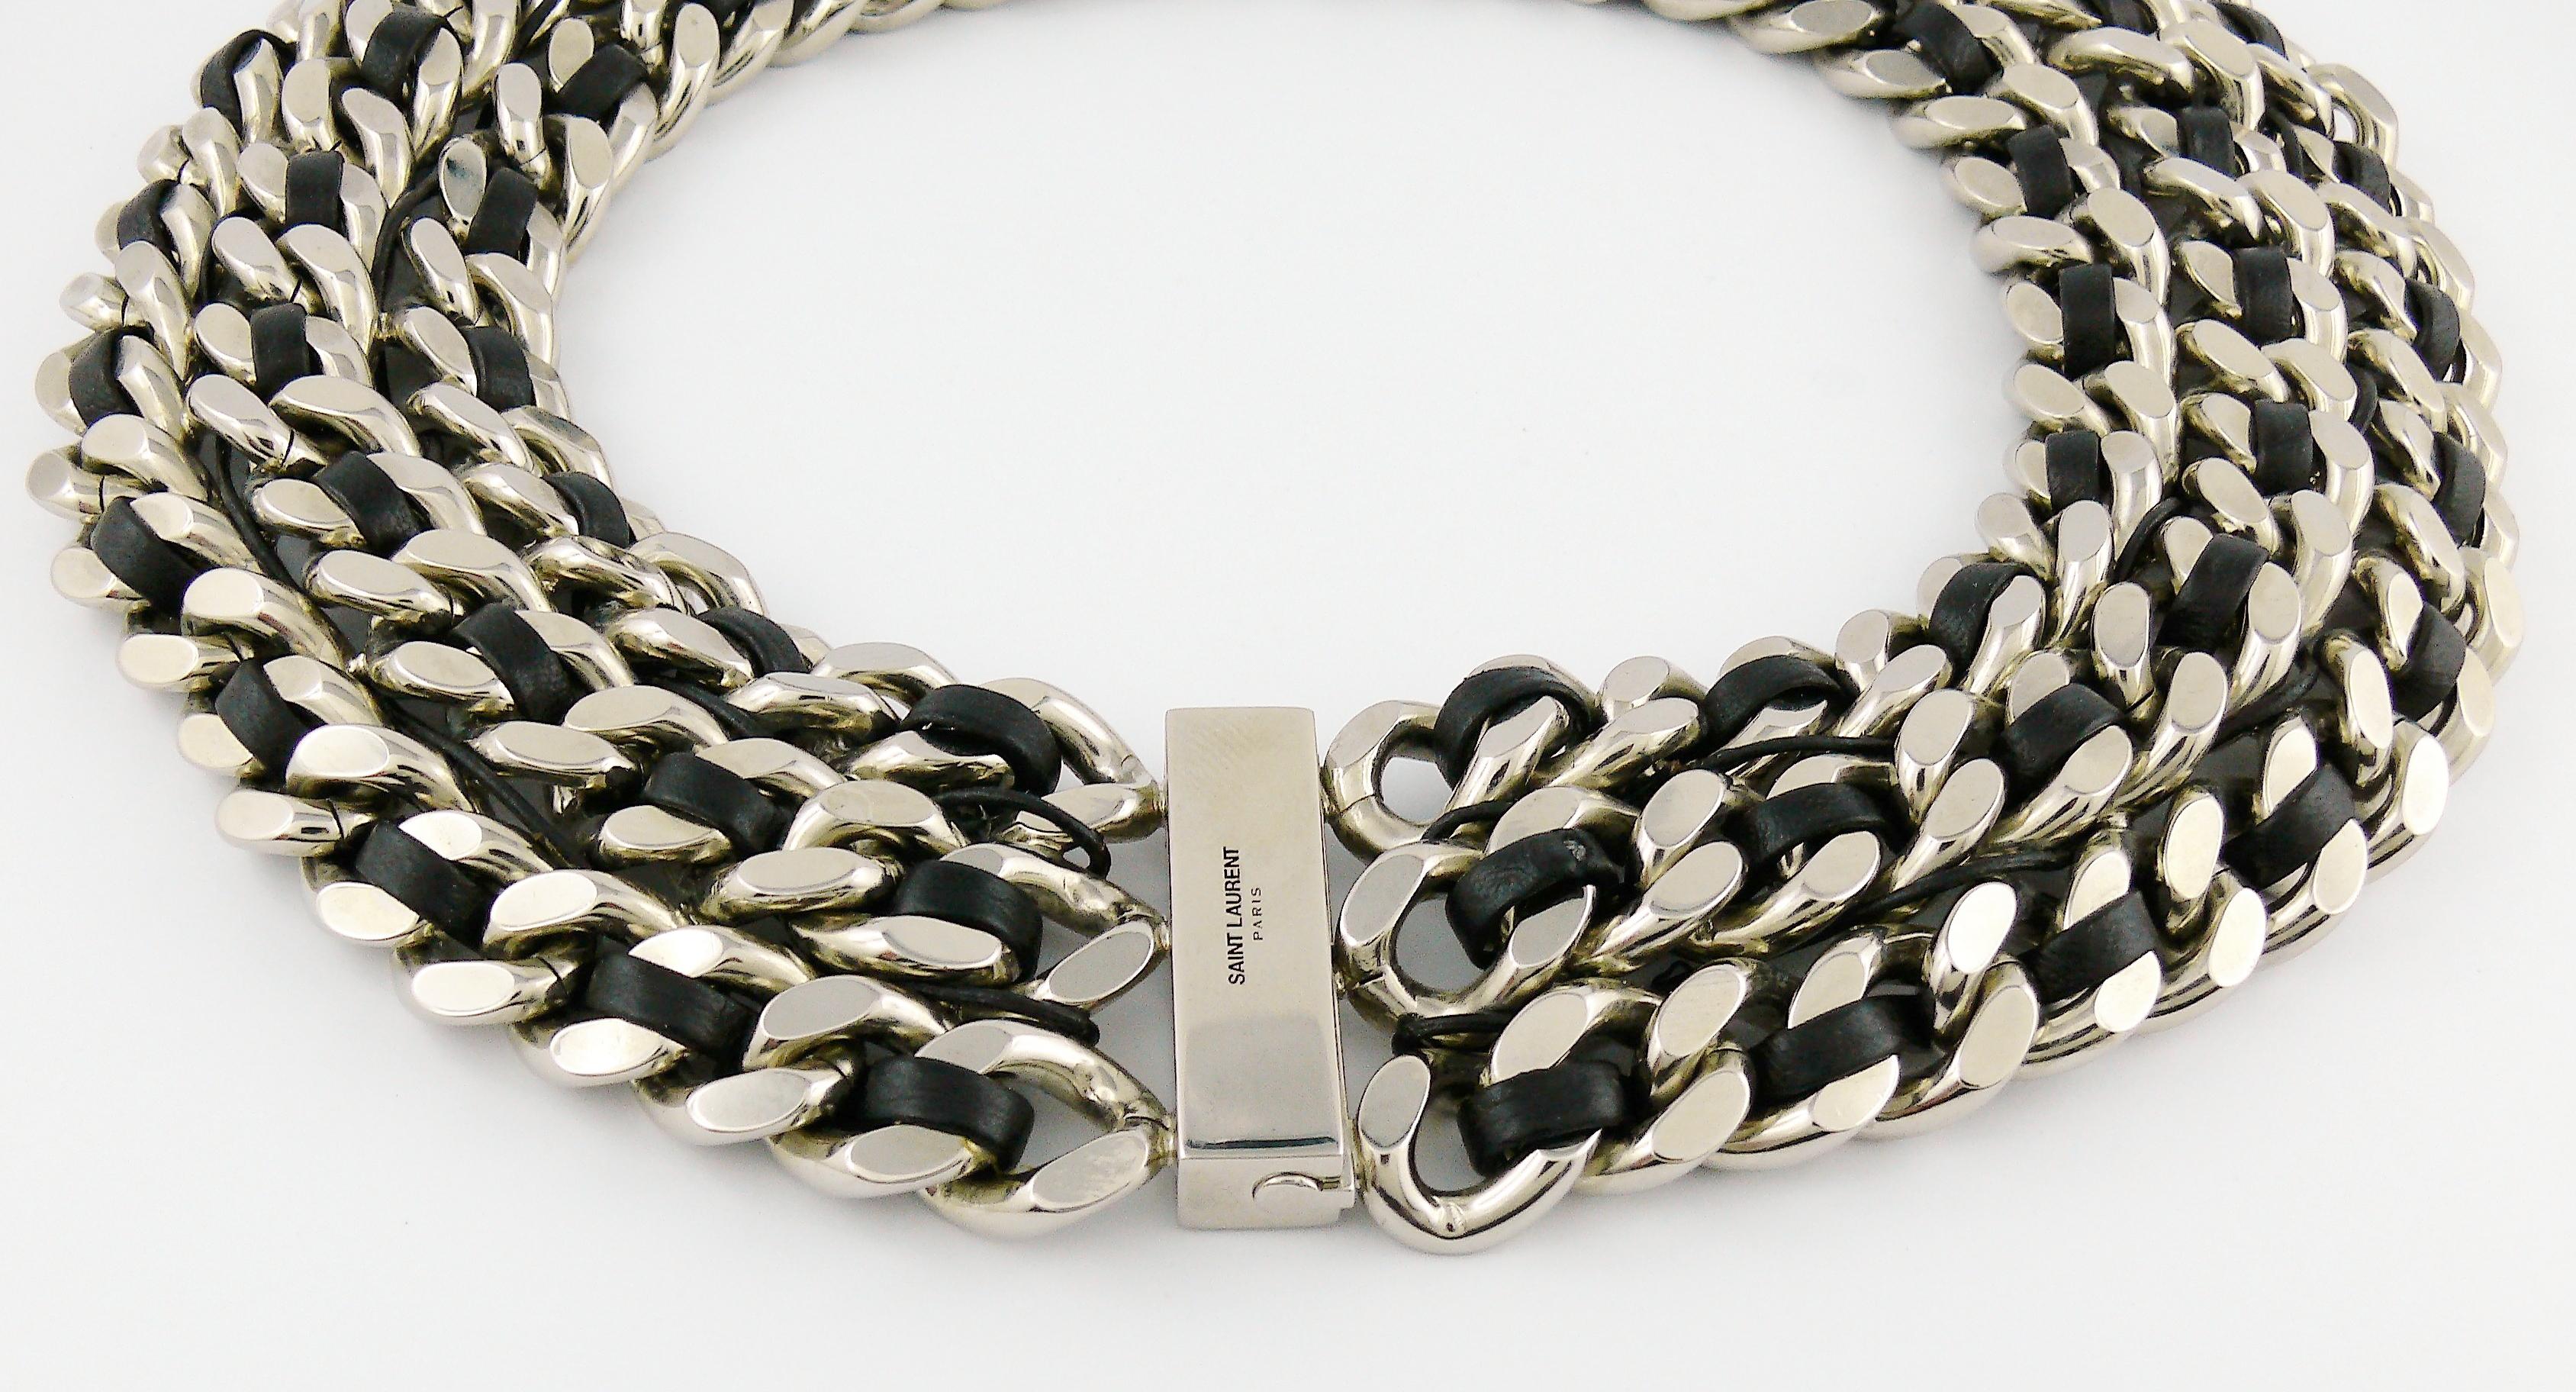 Saint Laurent Woven Leather Chunky Curb Chain Choker Necklace 1